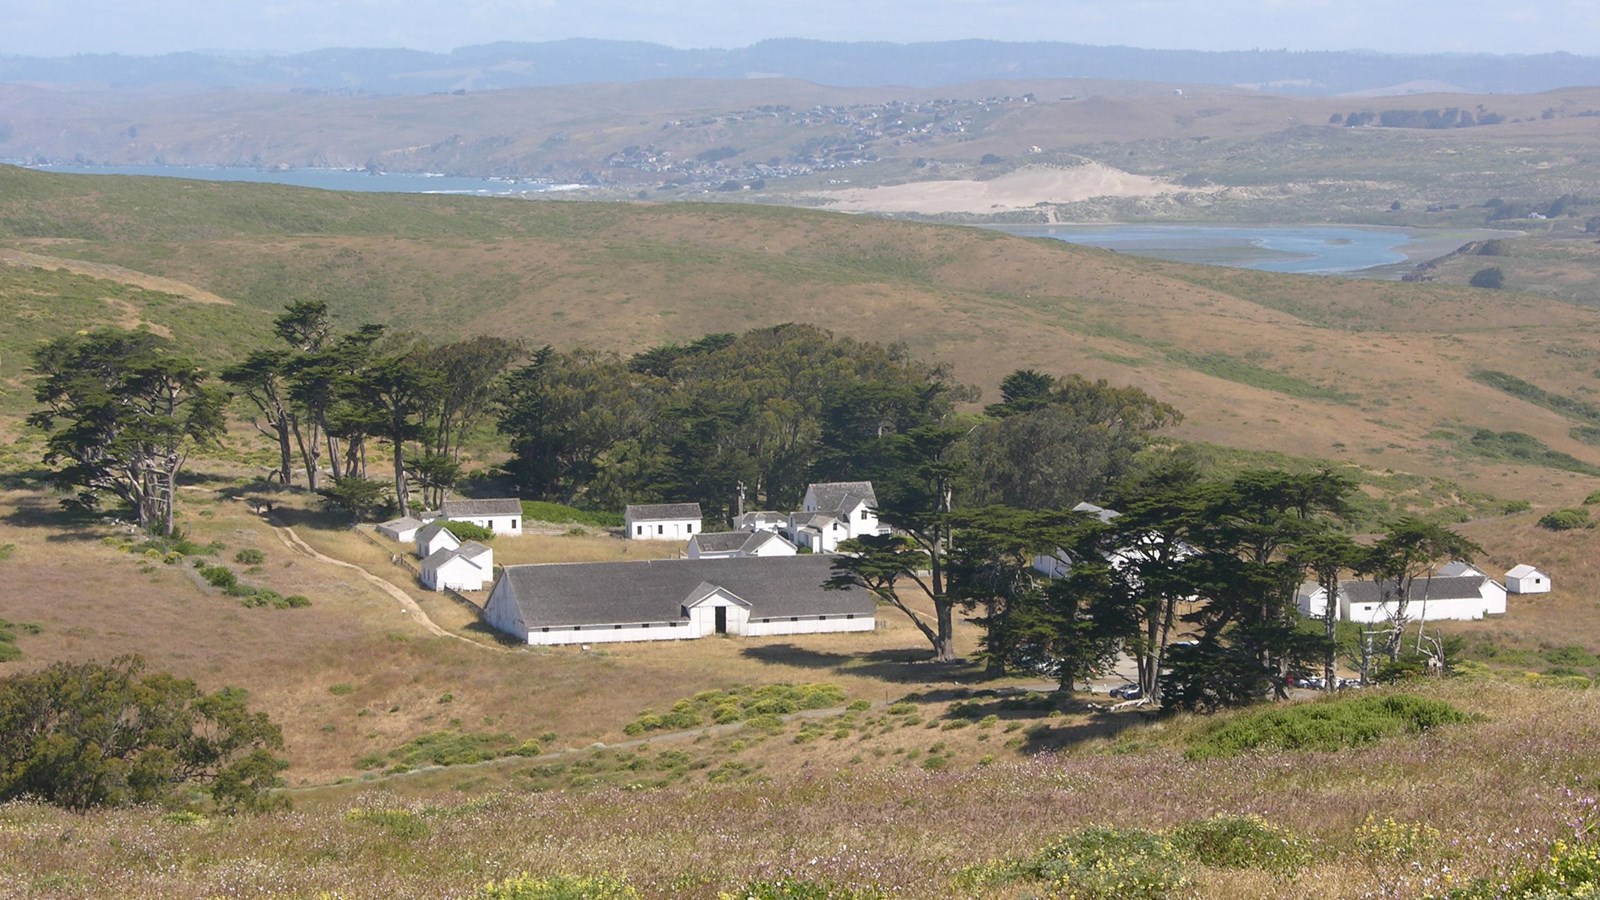 Pierce point ranch overlooks Tomales Bay. The white buildings are clustered in the shelter of pines.